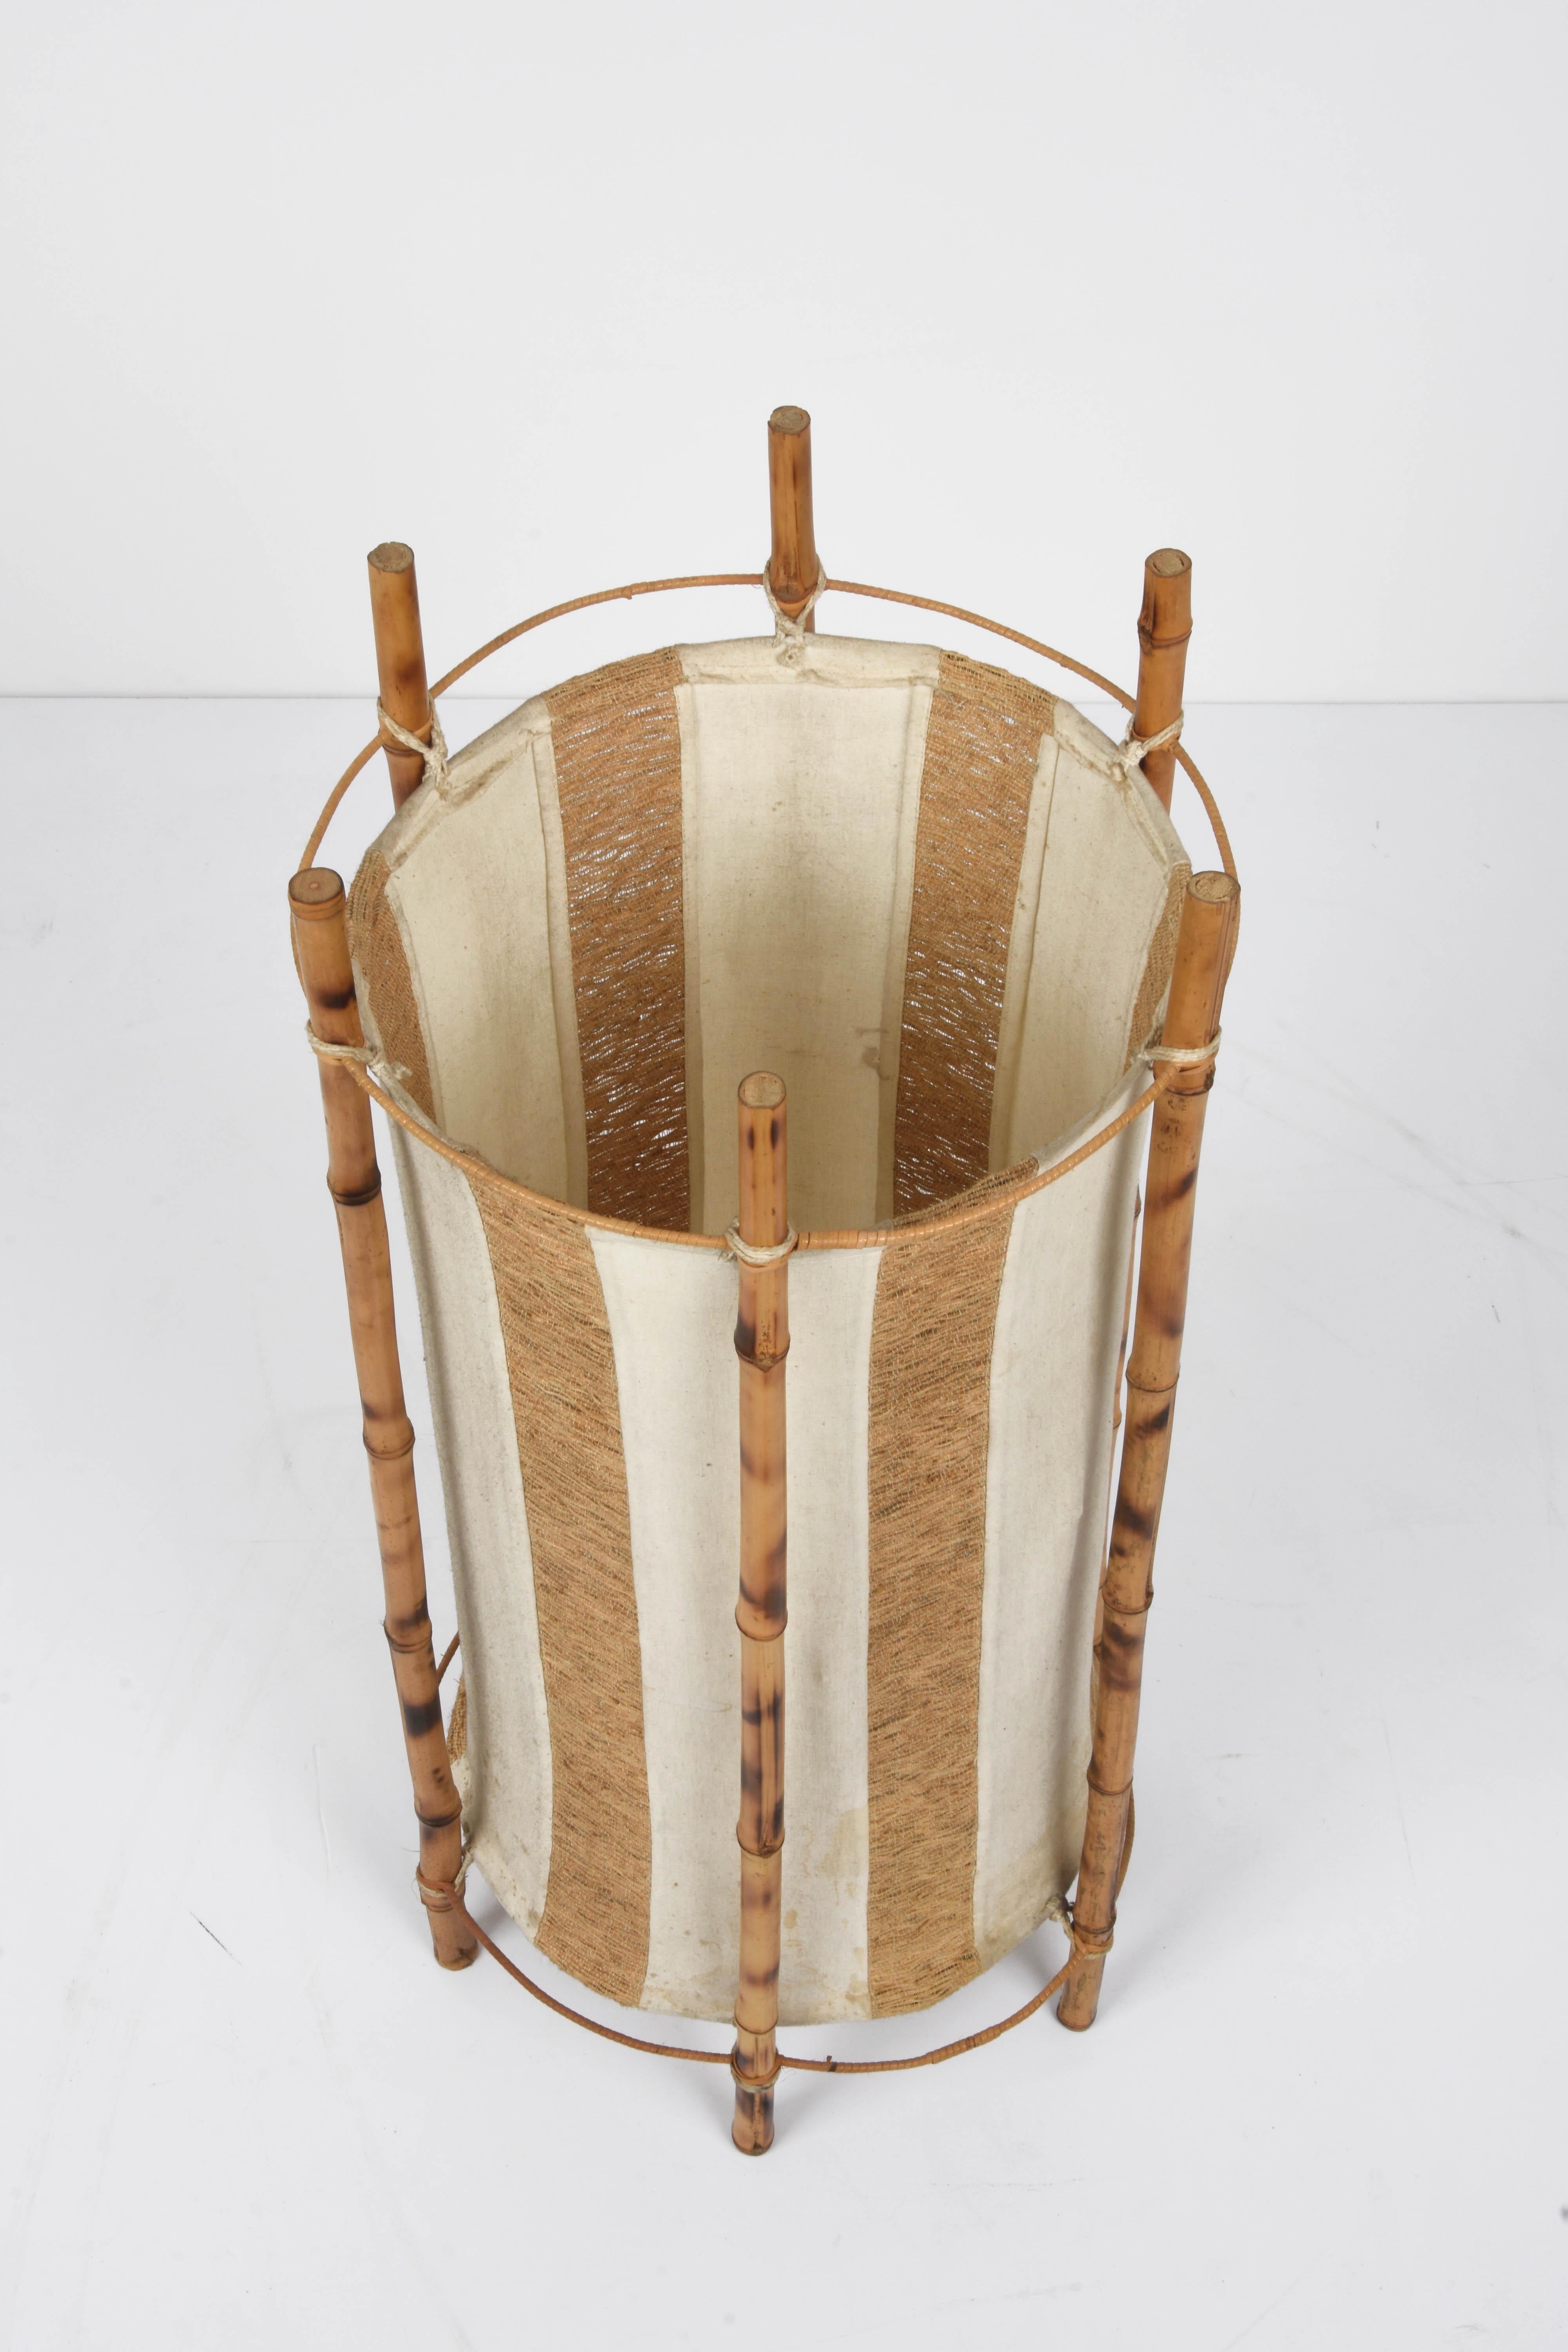 French Louis Sognot Midcentury Cotton, Bamboo and Rattan Italian Floor Lamp, 1950s For Sale